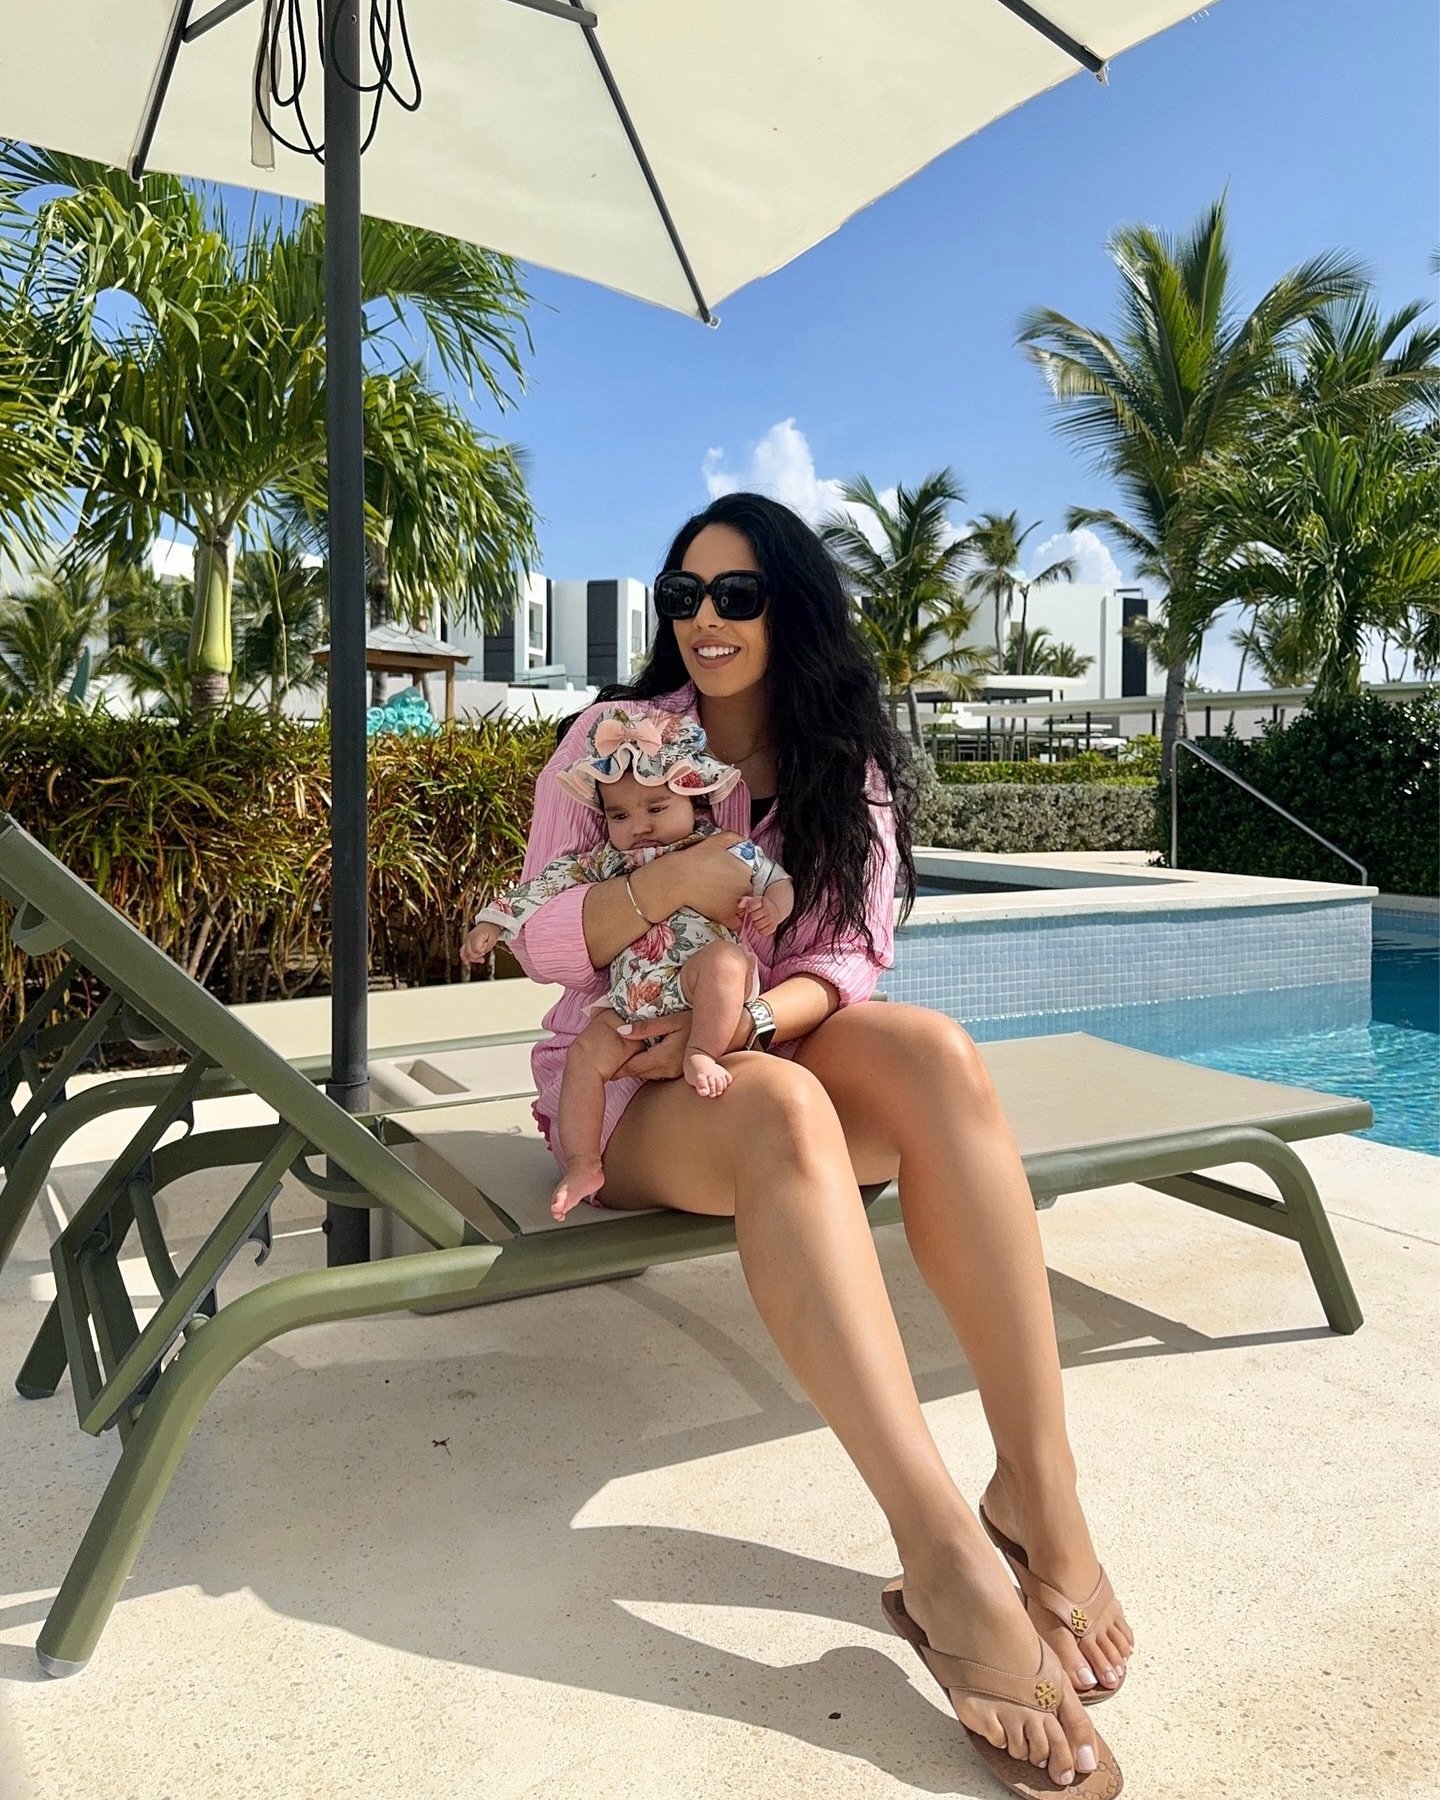 Mommy &amp; Me pool day! 🩷 My outfit is under $50 and comes in soo many colors! Shop my outfit with the @shop.LTK app #mommyandme #summerstyle #holidayoutfits #babygirl #liketkit https://liketk.it/4GLOd

outfit inspo, summer ootd, summer style, summ